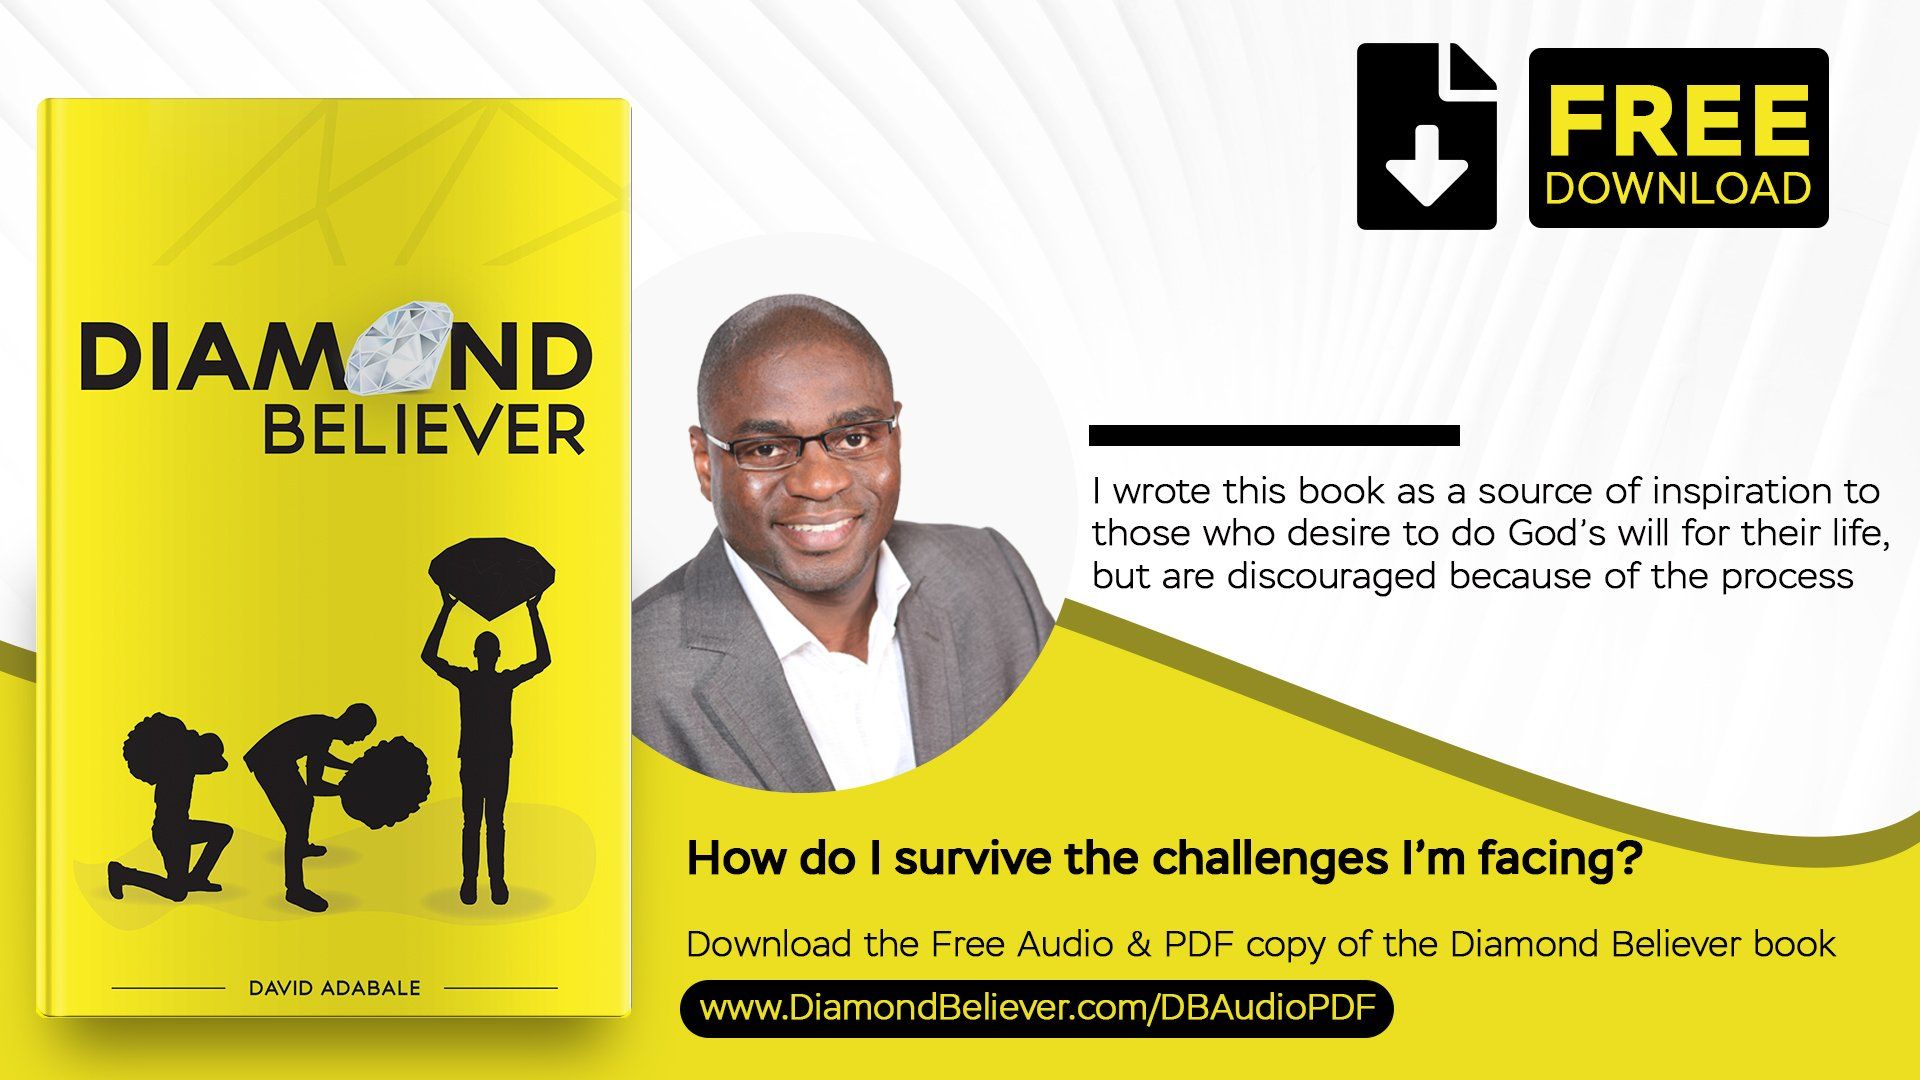 Click on image for the free download the first chapter of the book audio and ebook.